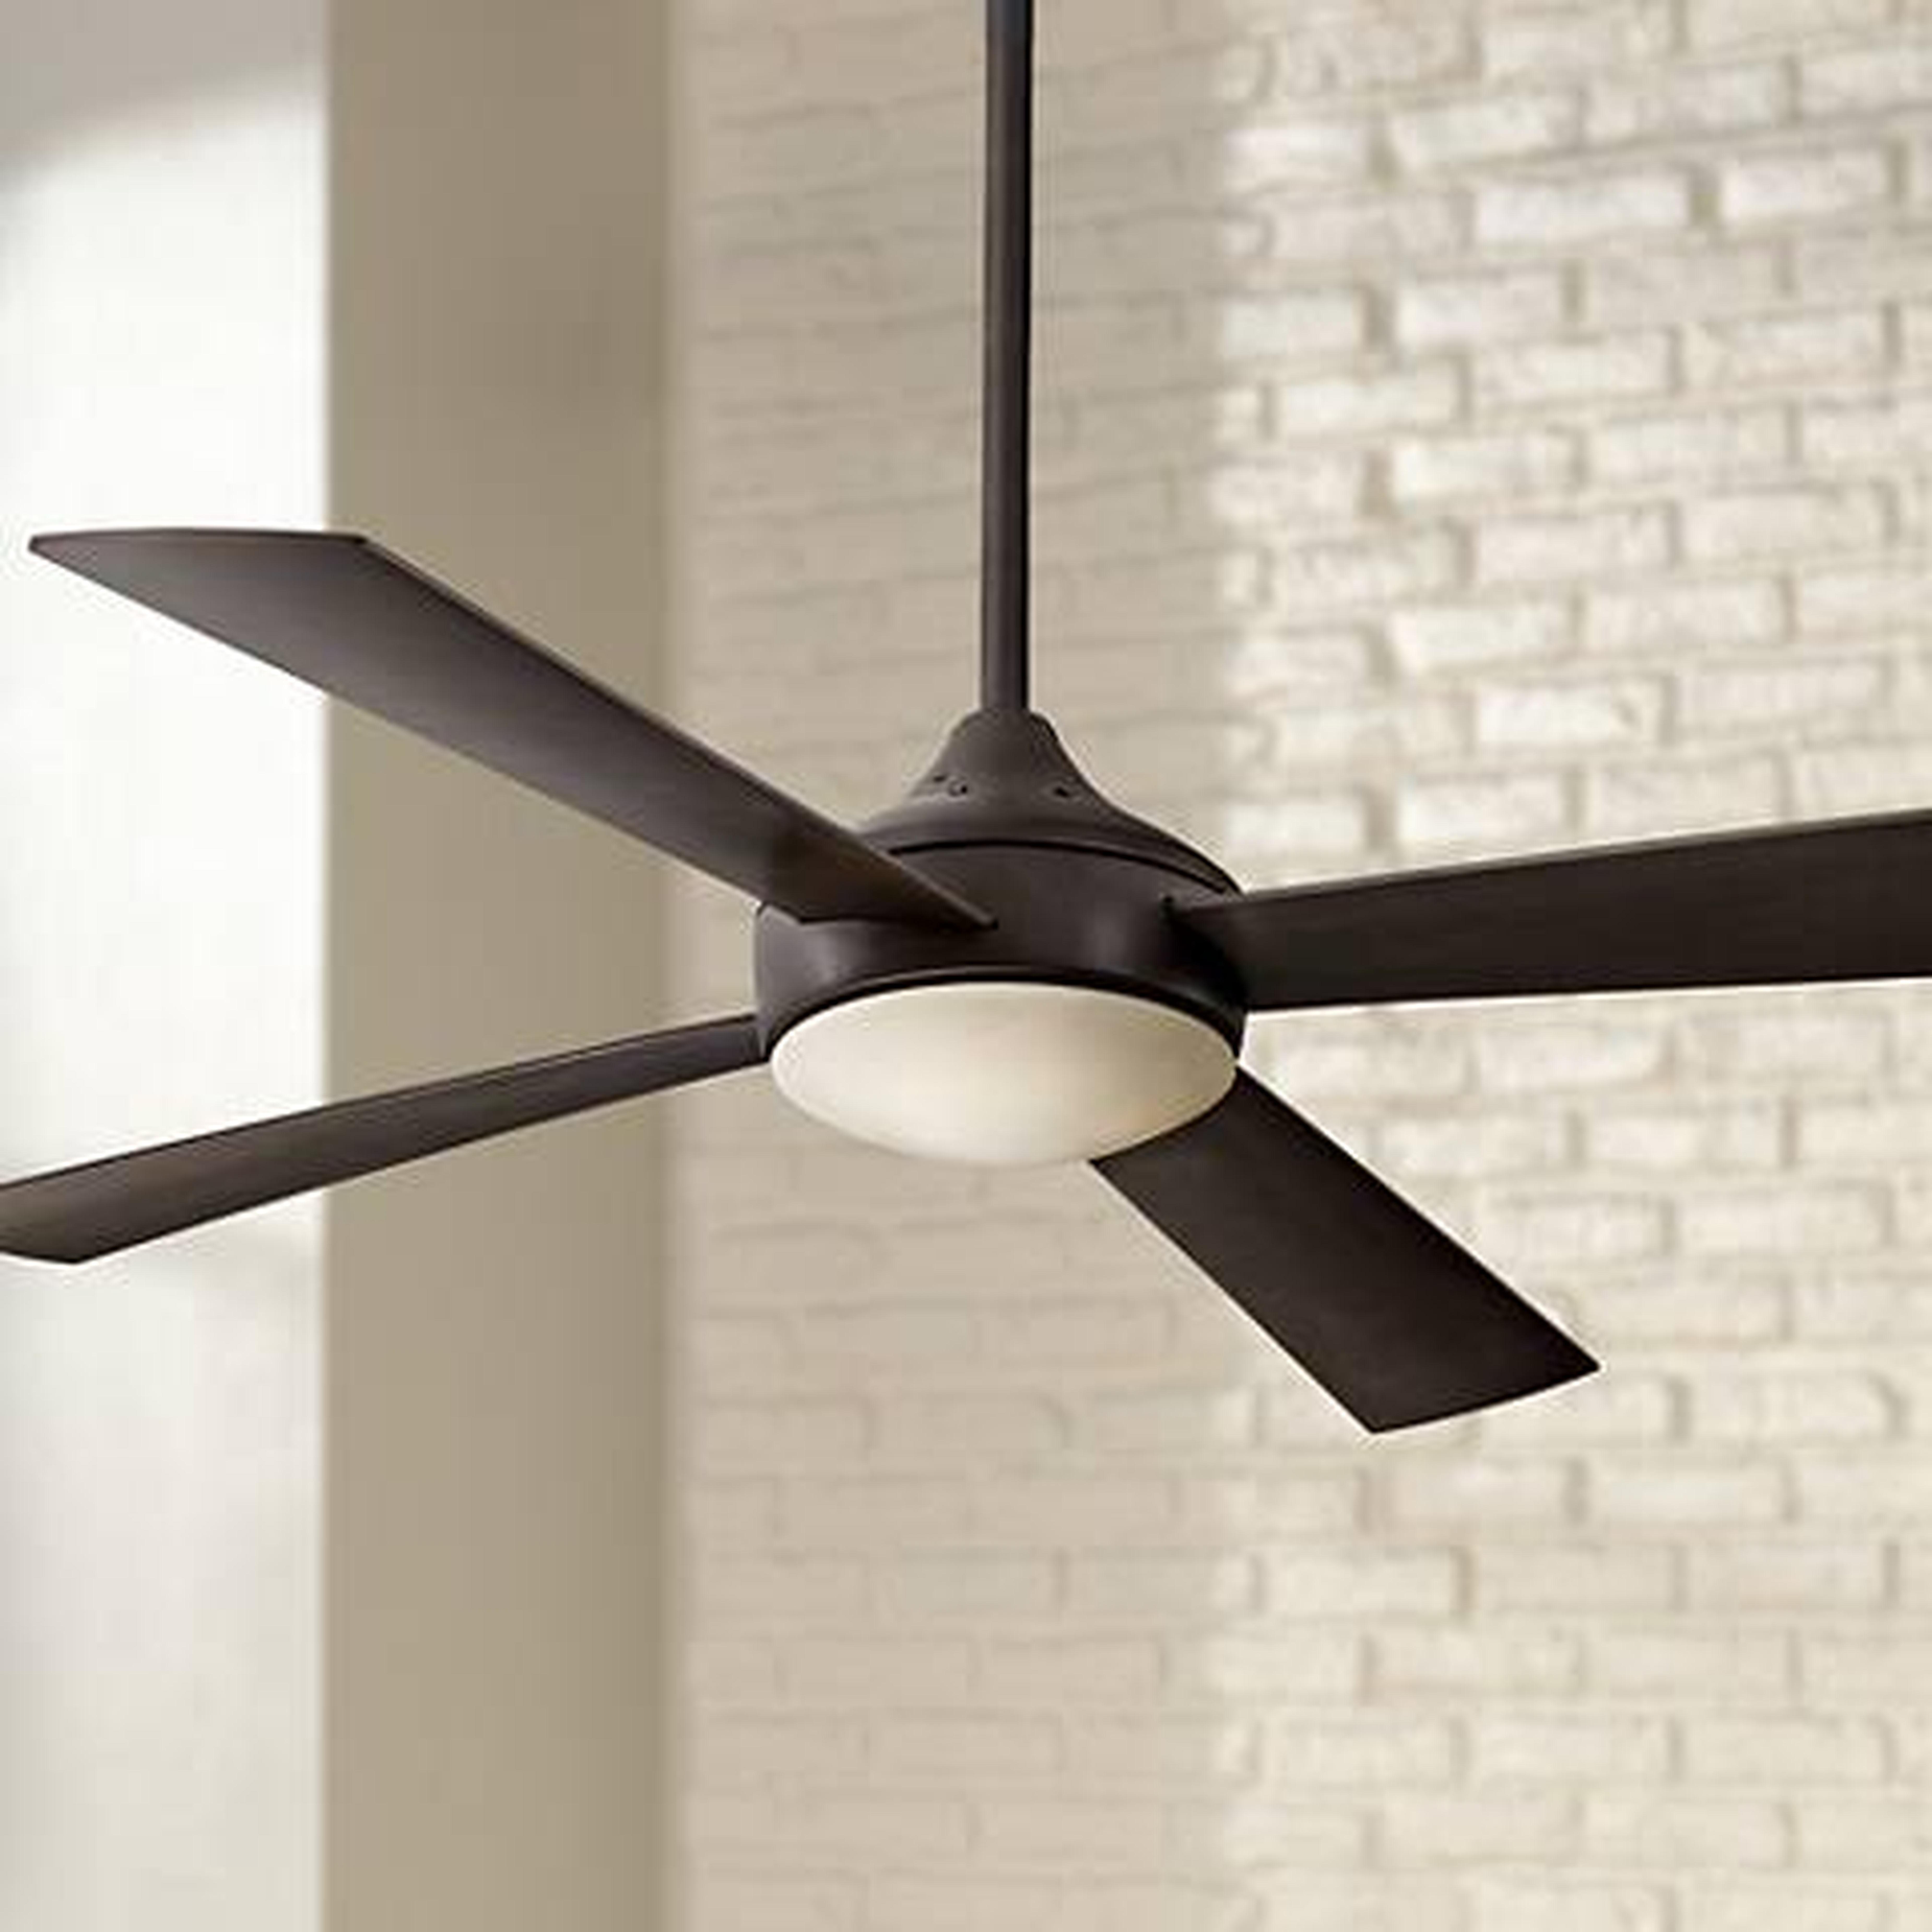 52" Minka Aire Aluma Oil-Rubbed Bronze Ceiling Fan - with 24" downrod for 12' ceiling - Lamps Plus